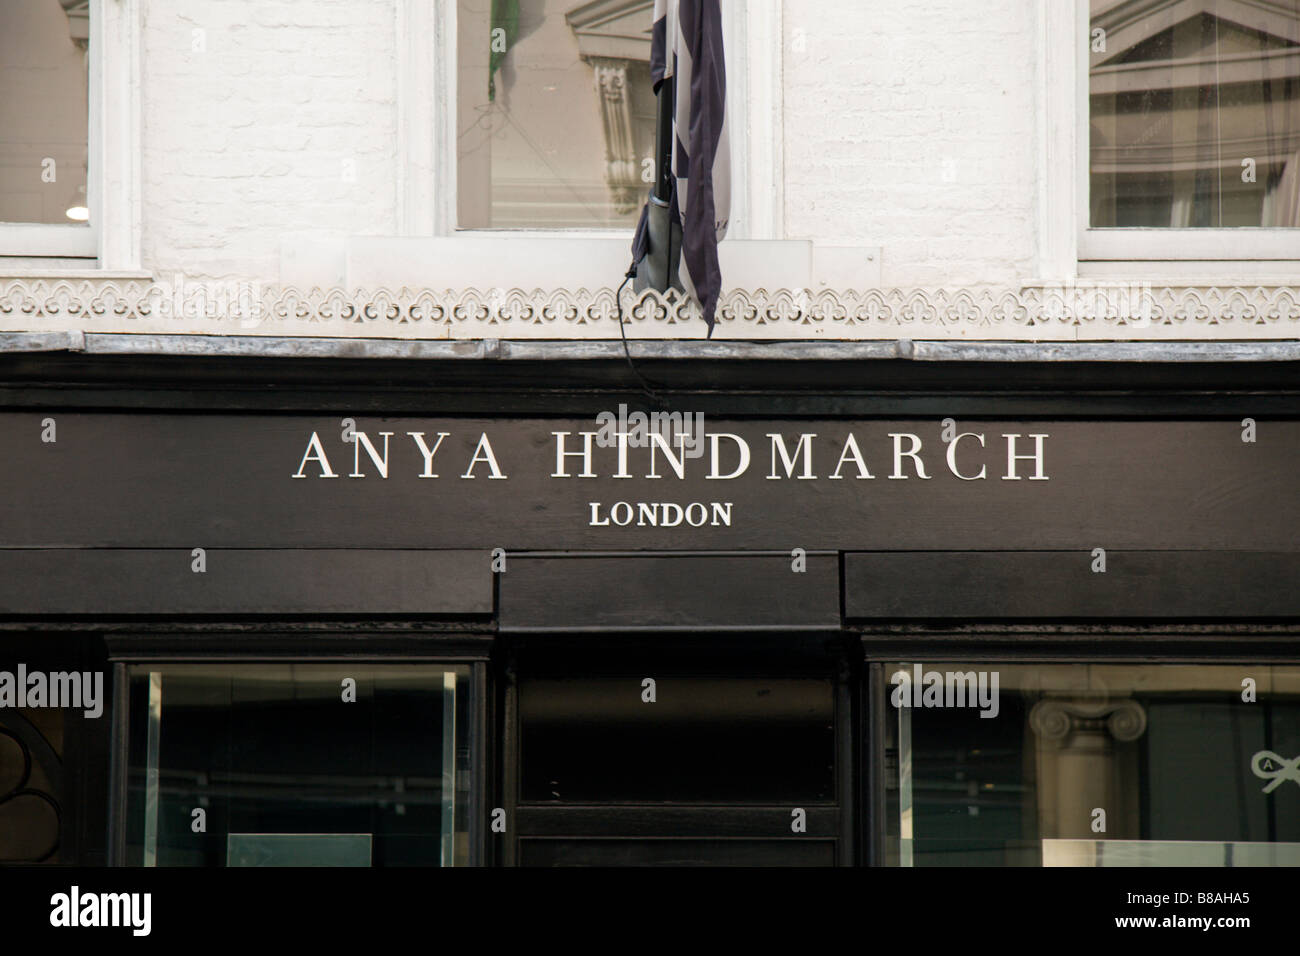 The sign above the shop front of the Anya Hindmarch fashion shop, Bond Street, London. Jan 2009 Stock Photo